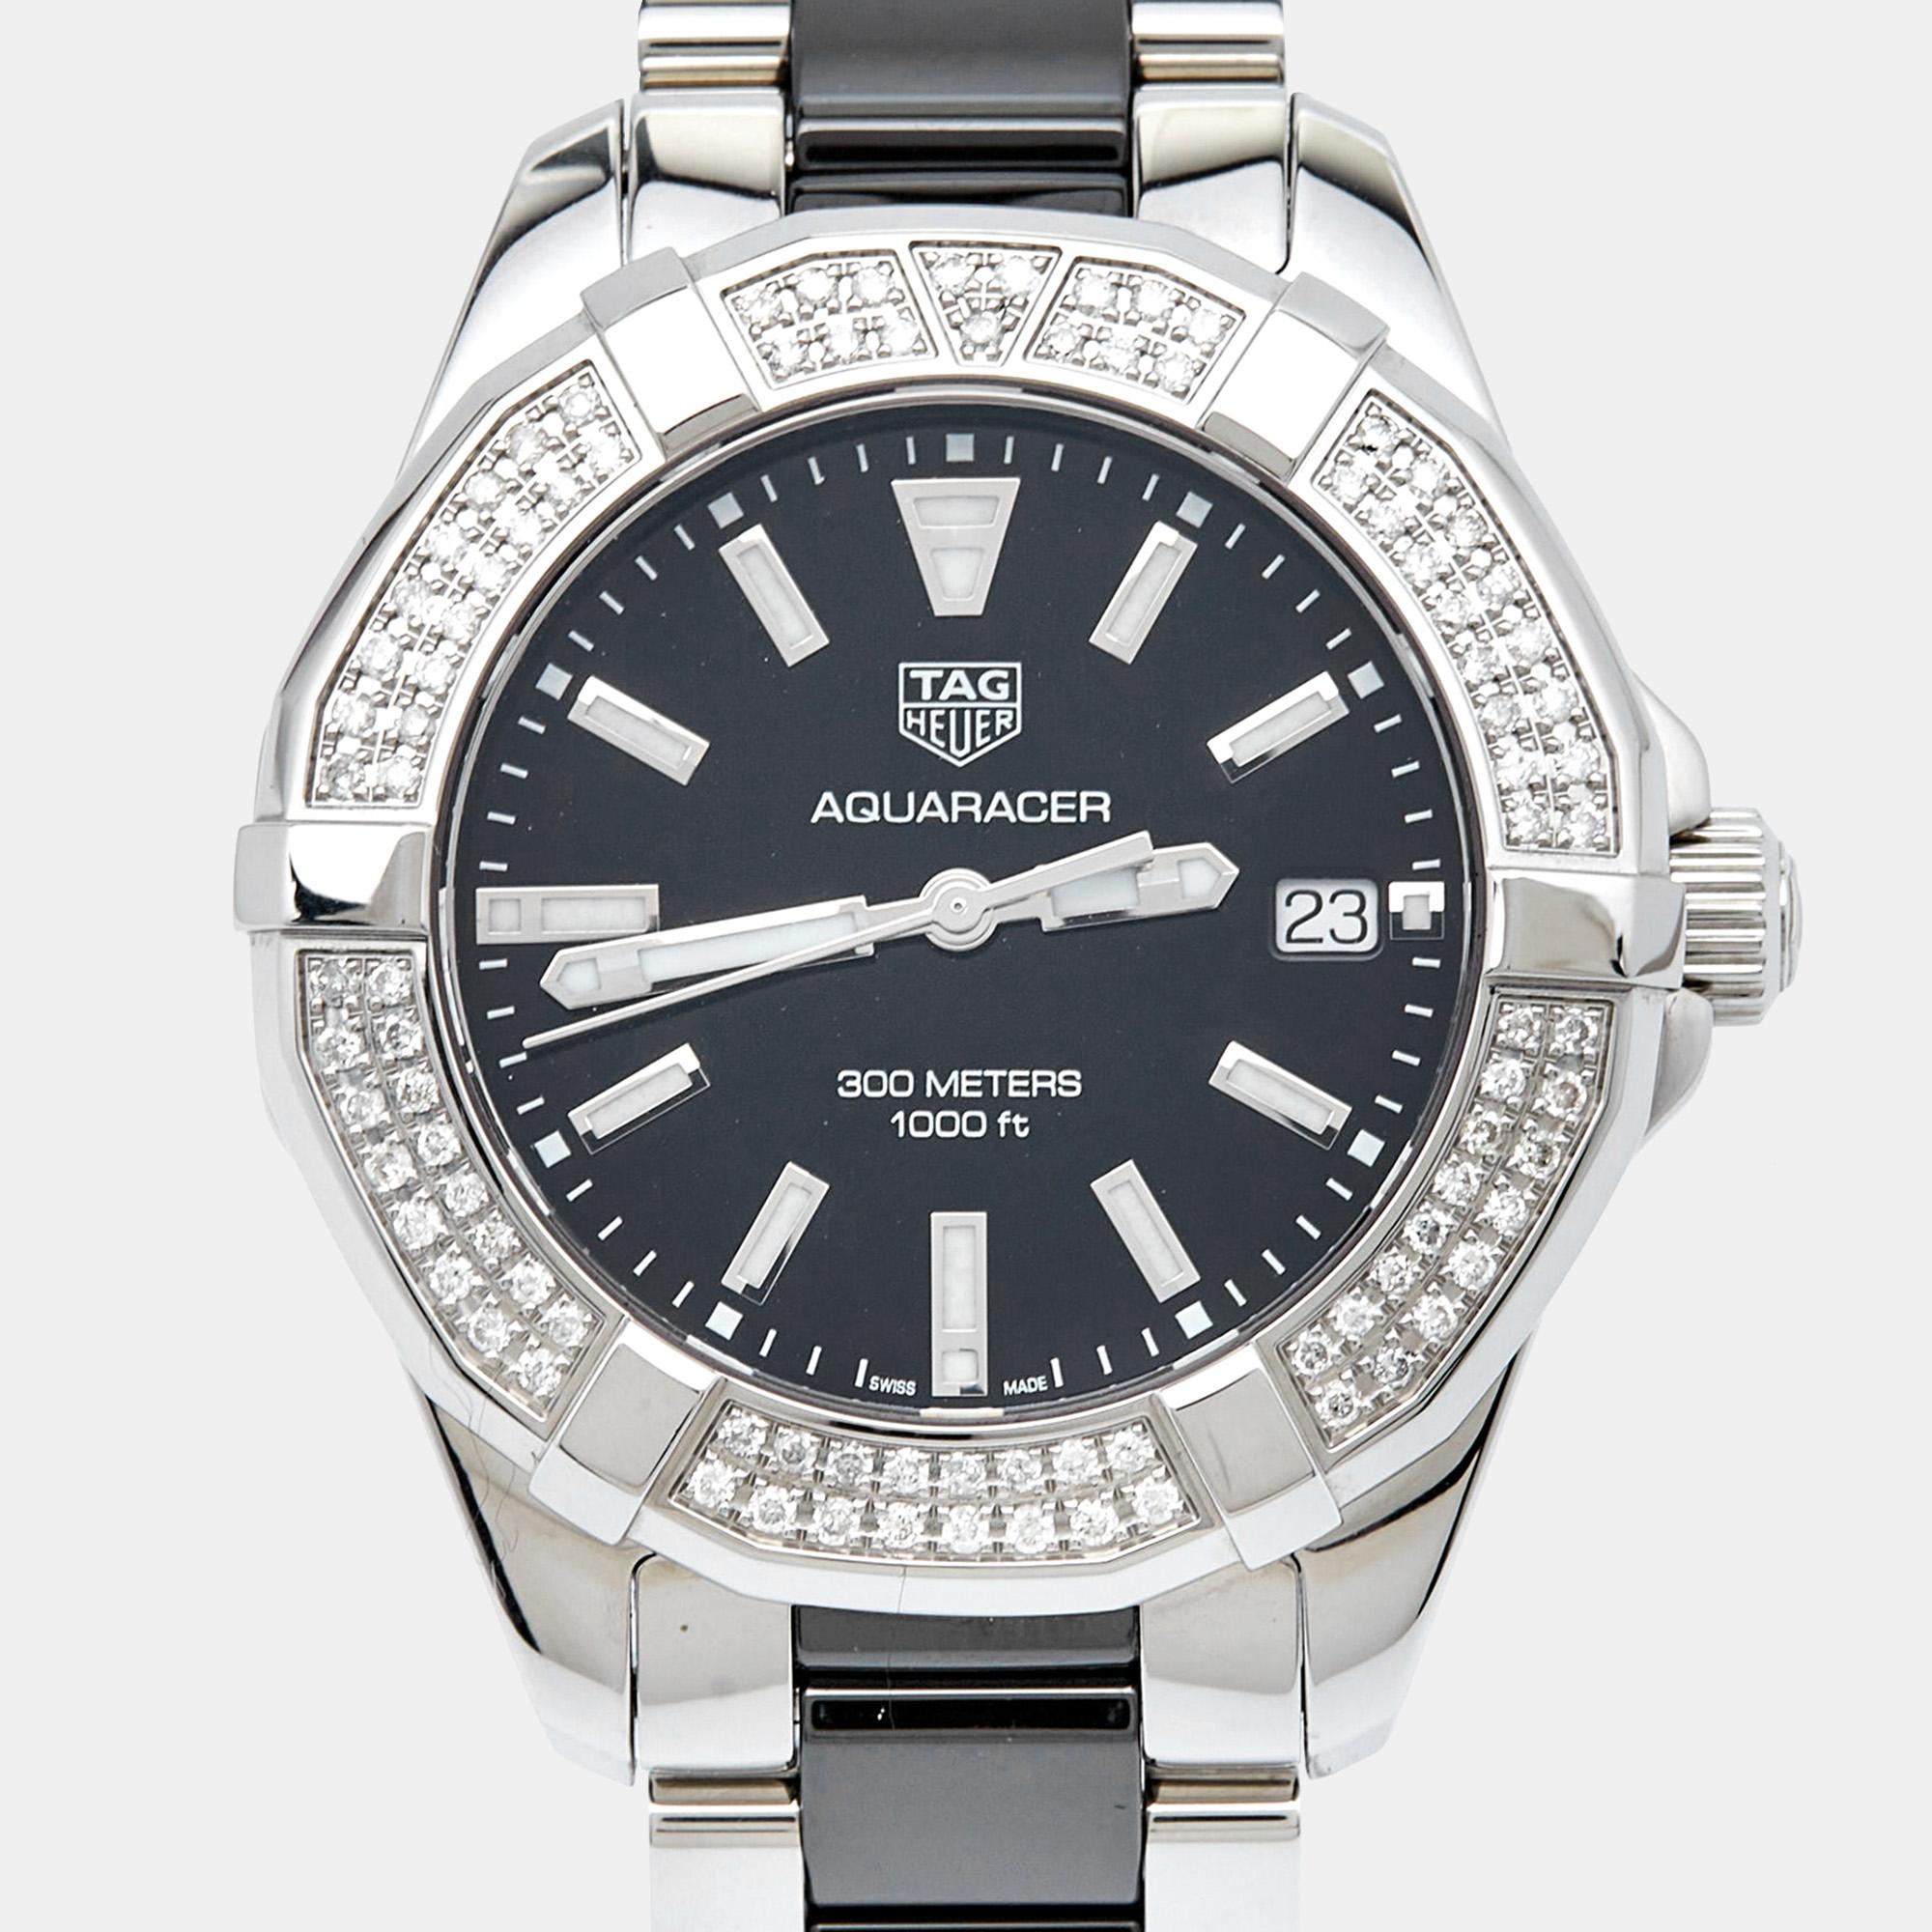 Incorporate TAG Heuer's sophisticated style into your ensemble with this exquisite Aquaracer wristwatch. It exhibits the brand's dedication to creativity and its expertise in the art of watchmaking.

Includes
Original Box, Original Case, Extra Links